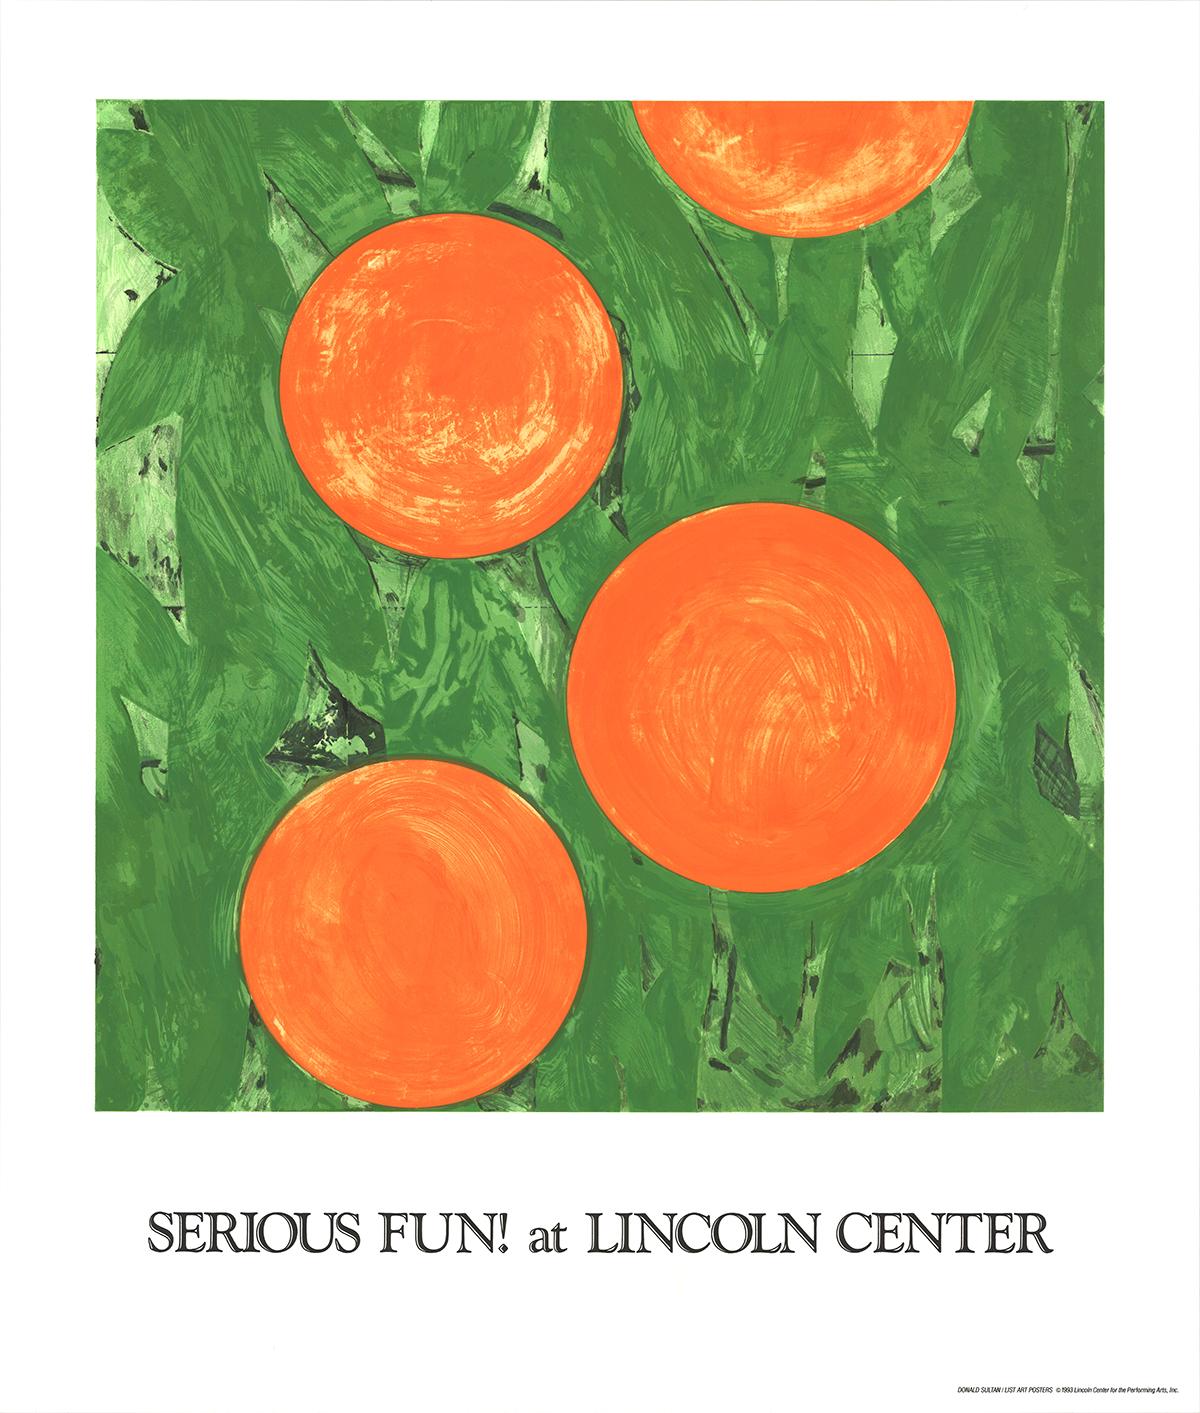 First edition silk-screen poster designed by Donald Sultan for the Serious Fun series of concerts presented at the Lincoln Center for the Performing Arts in New York City in 1993. 
